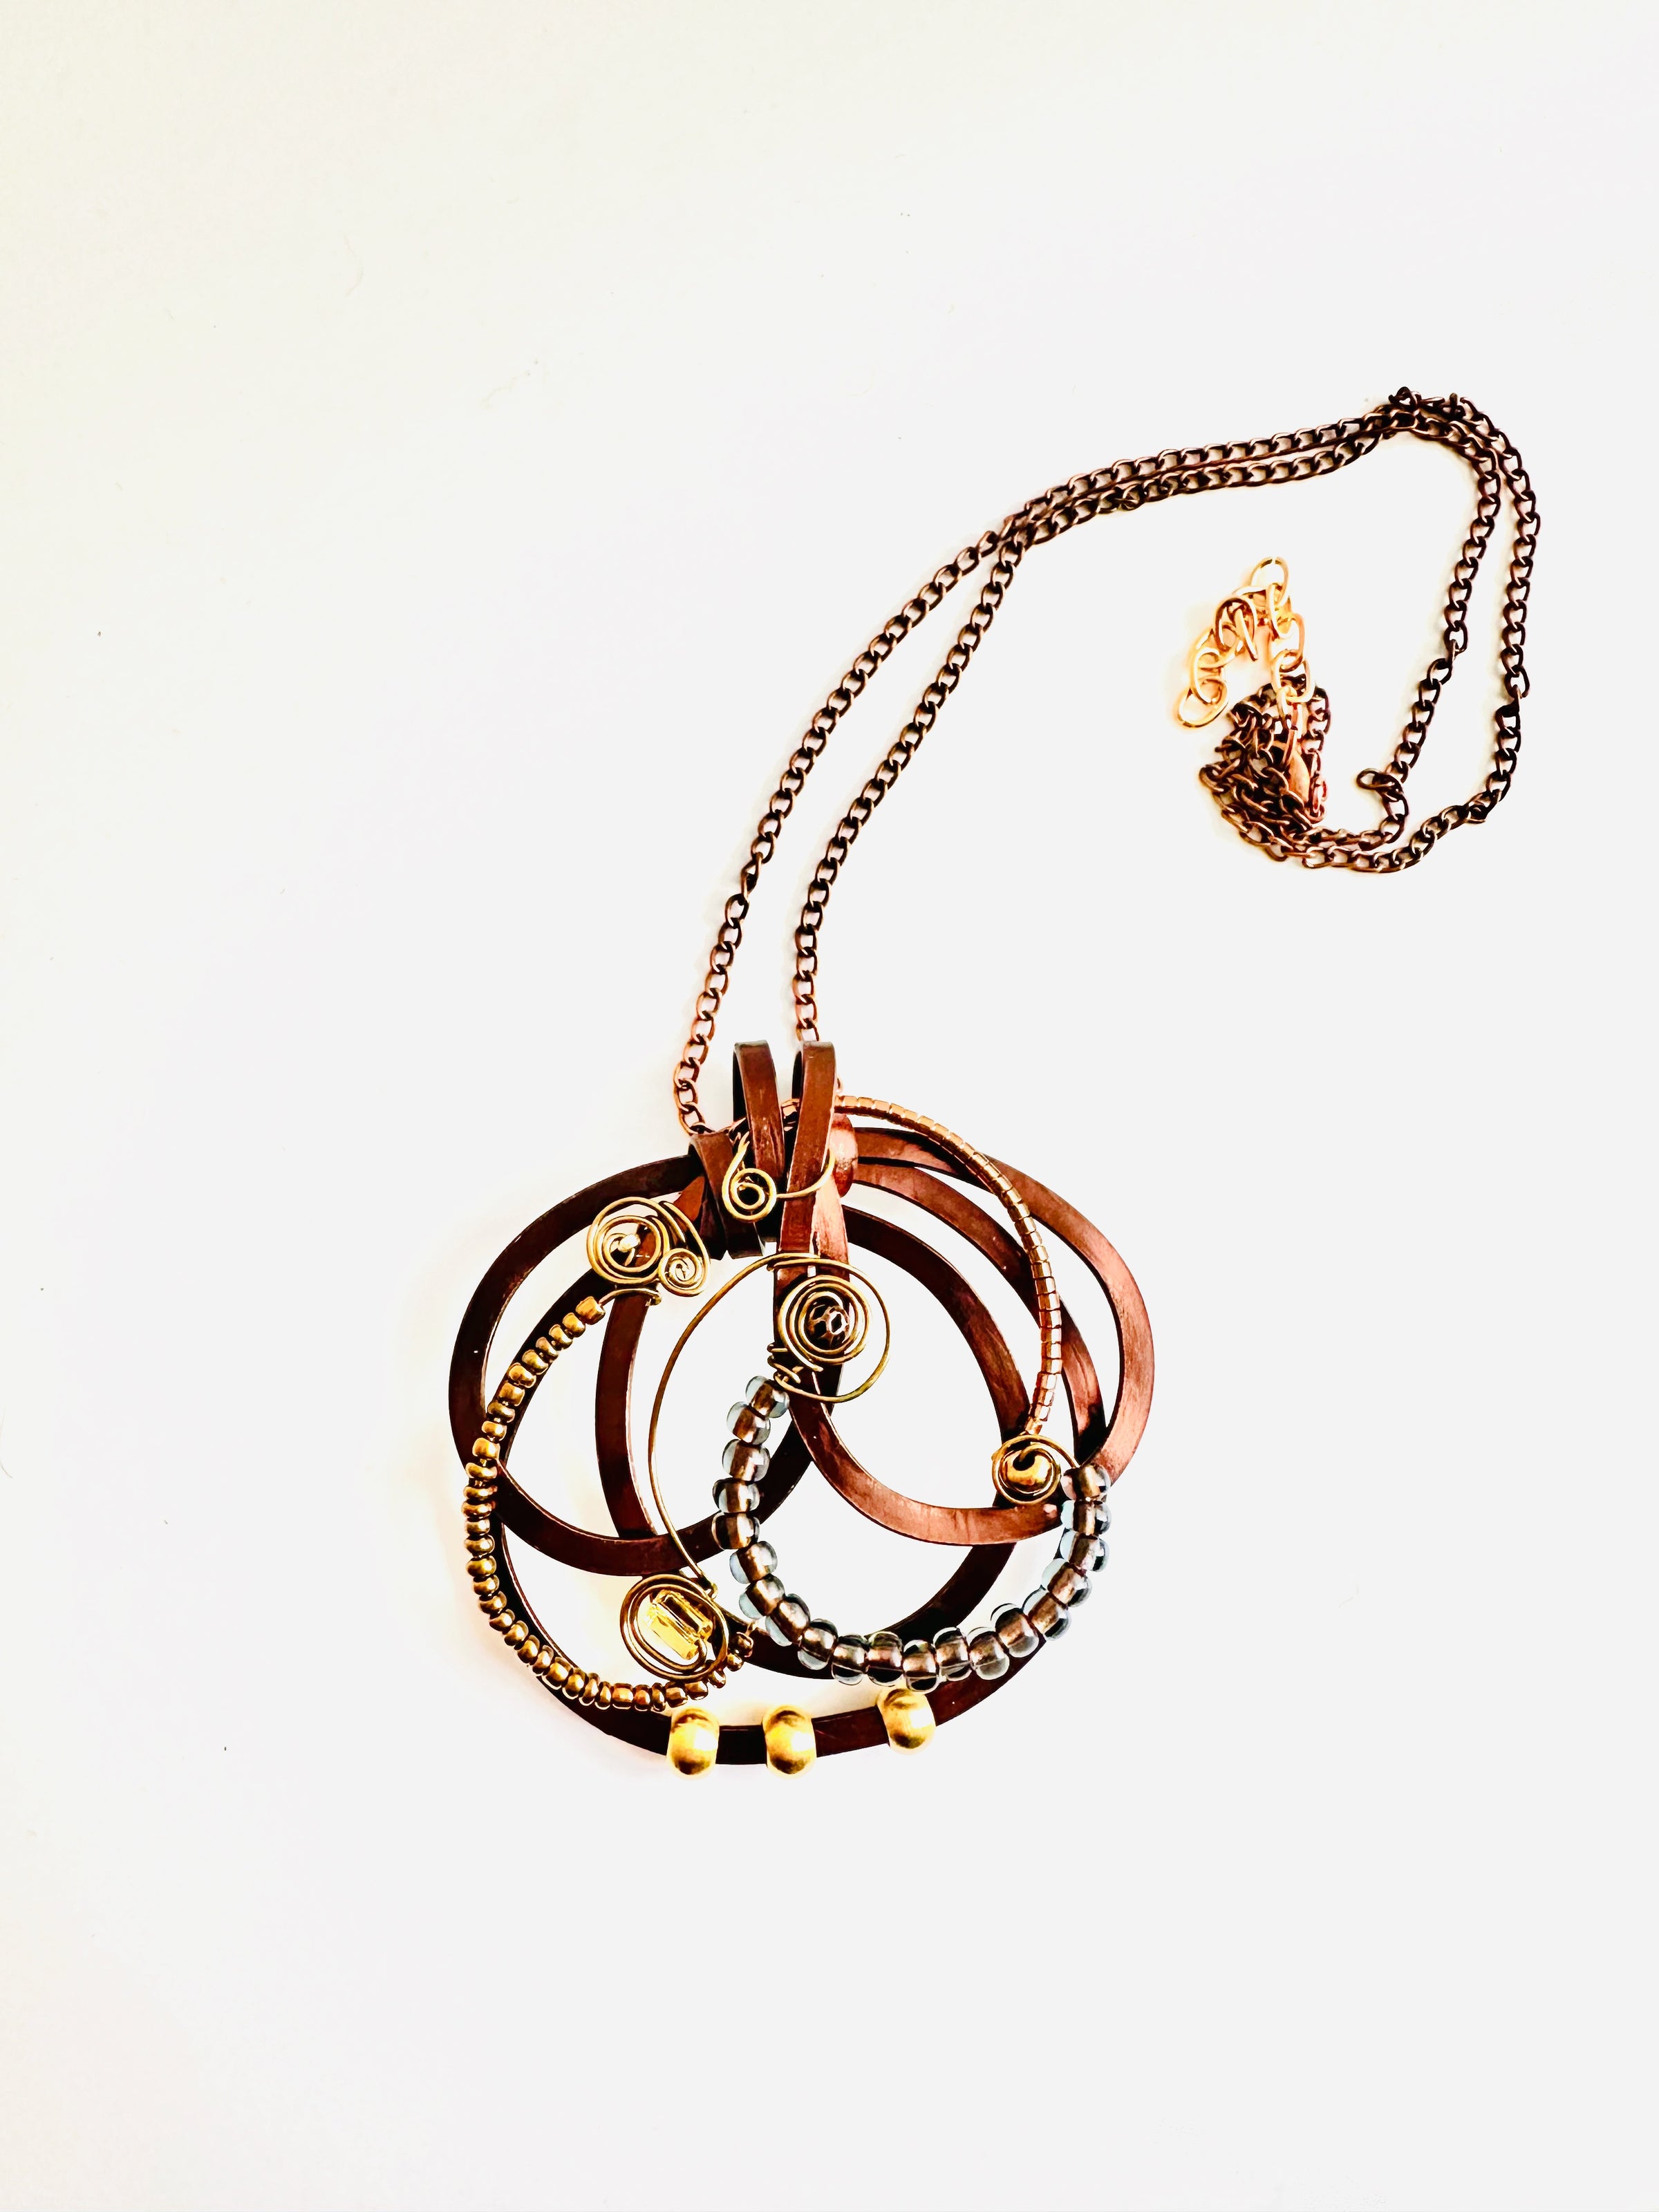 Necklace for Women, a collection that resonates with femininity and grace